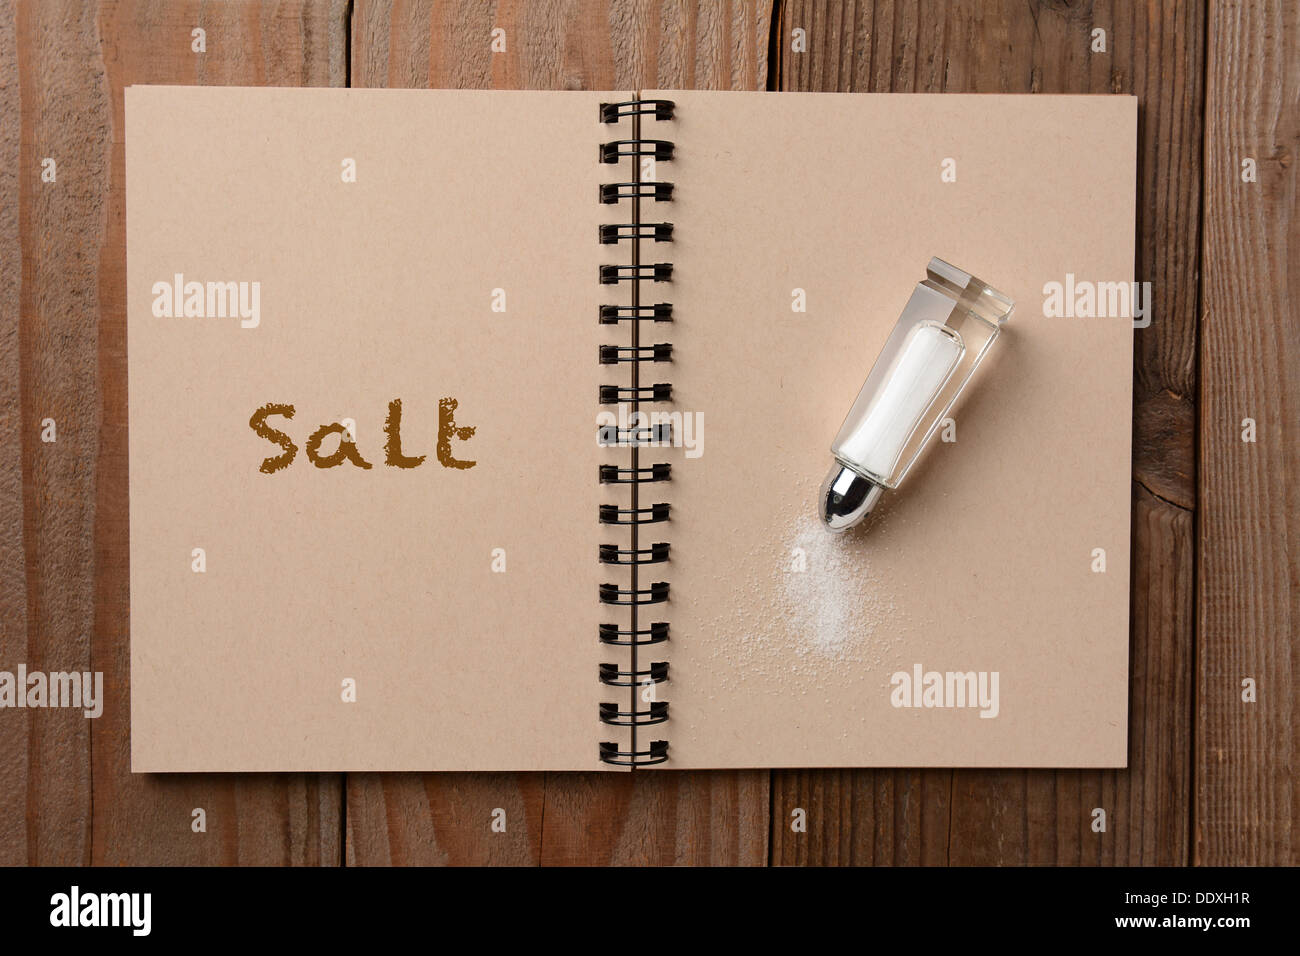 A salt shaker on the blank page of a notebook. The opposite page has the word salt spelled out. Stock Photo